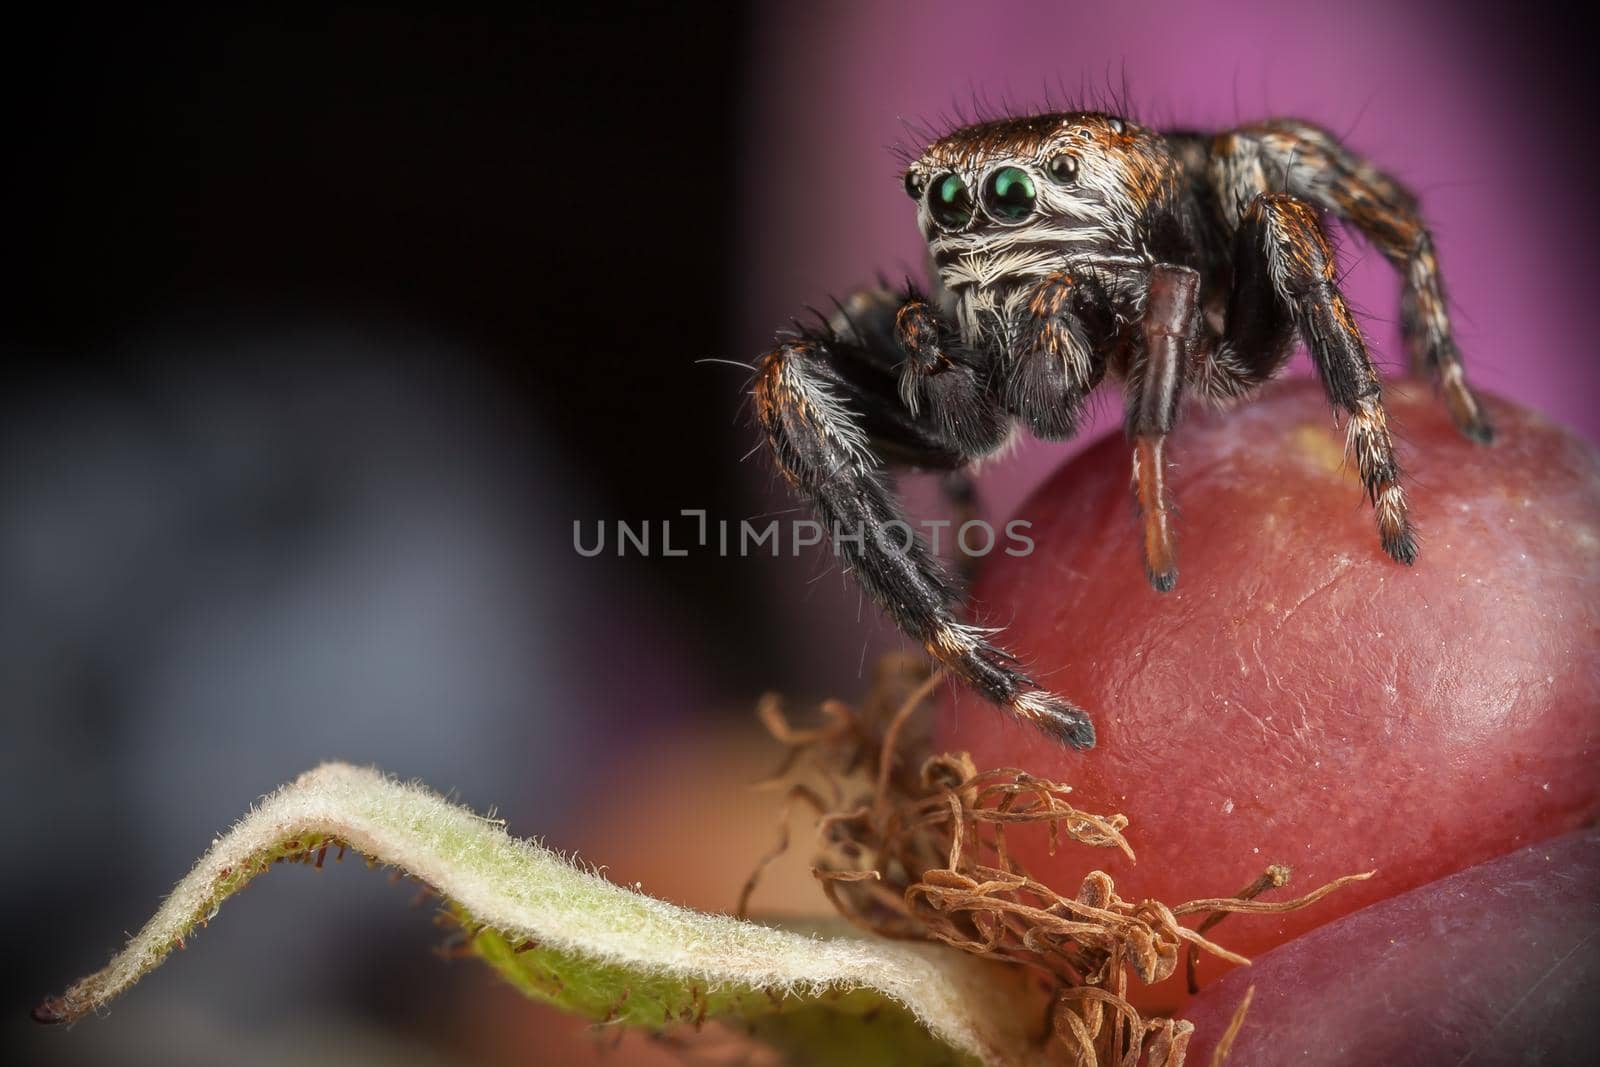 Jumping spider & Blackberry by Lincikas